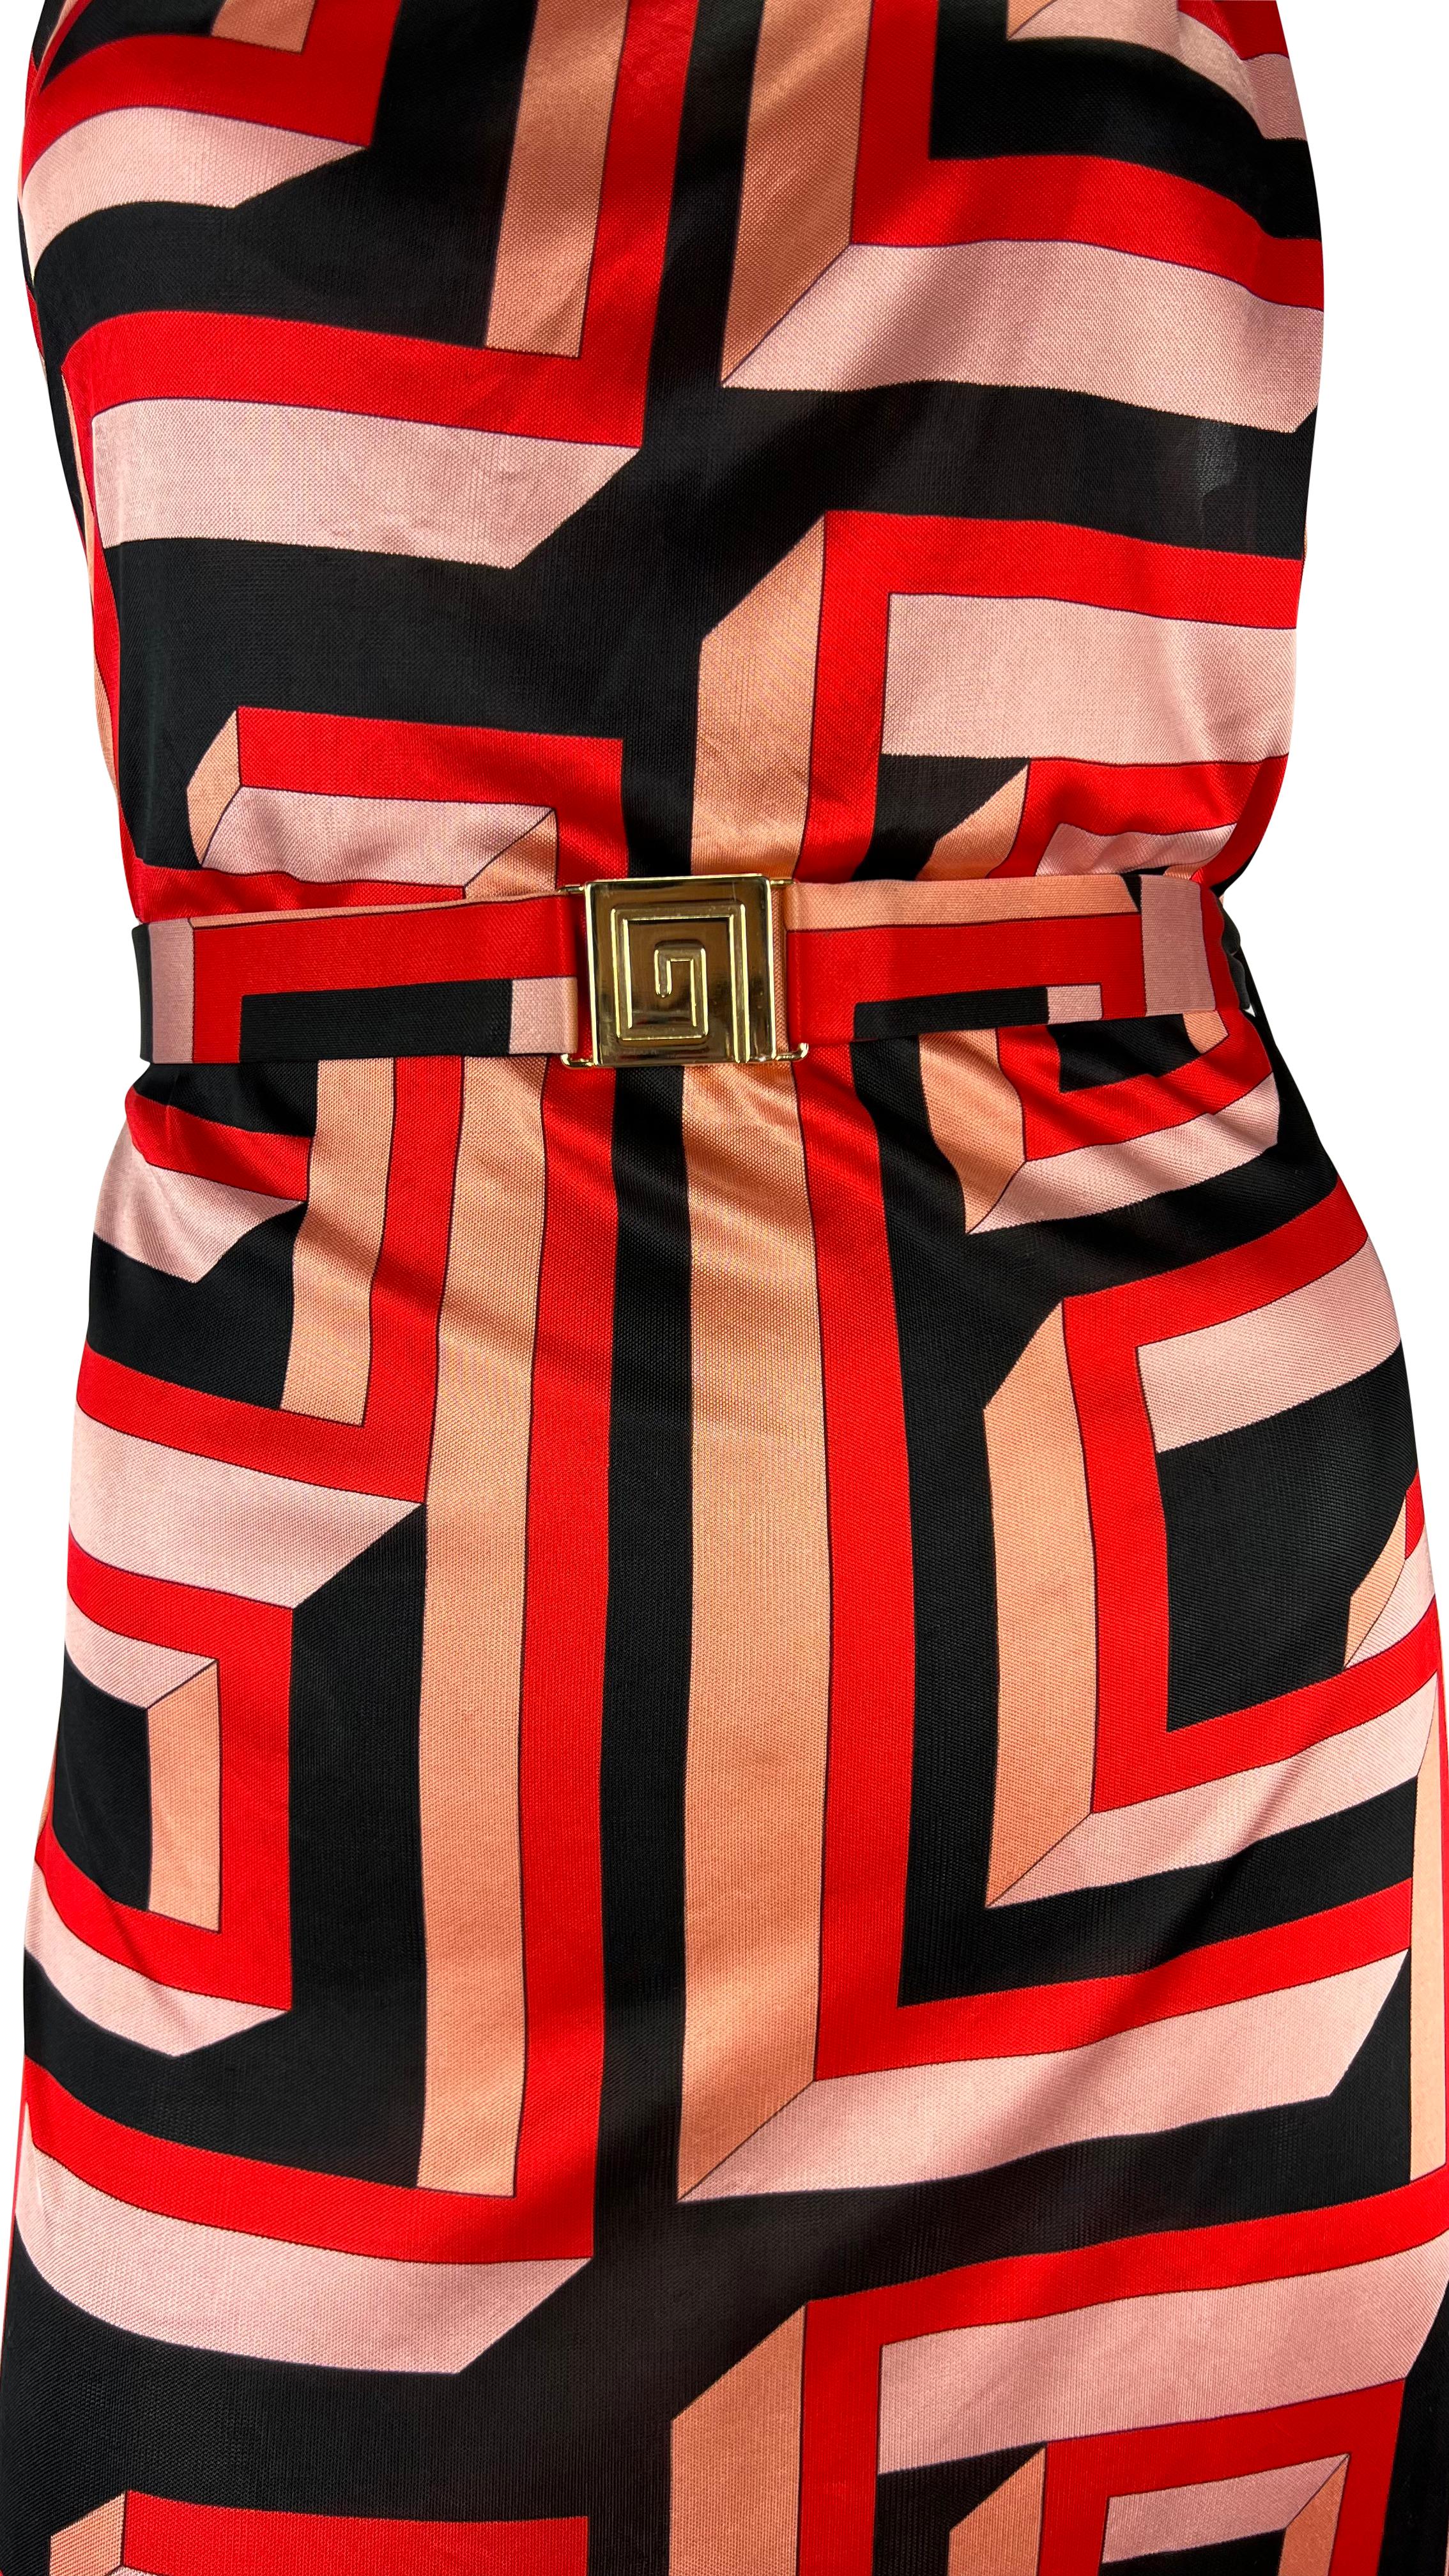 Presenting a chic red and black Greek key Gianni Versace mini dress, designed by Donatella Versace. From the Fall/Winter 2000 collection, this single-shoulder asymmetric dress is covered in a large red Greek key pattern. The single shoulder strap